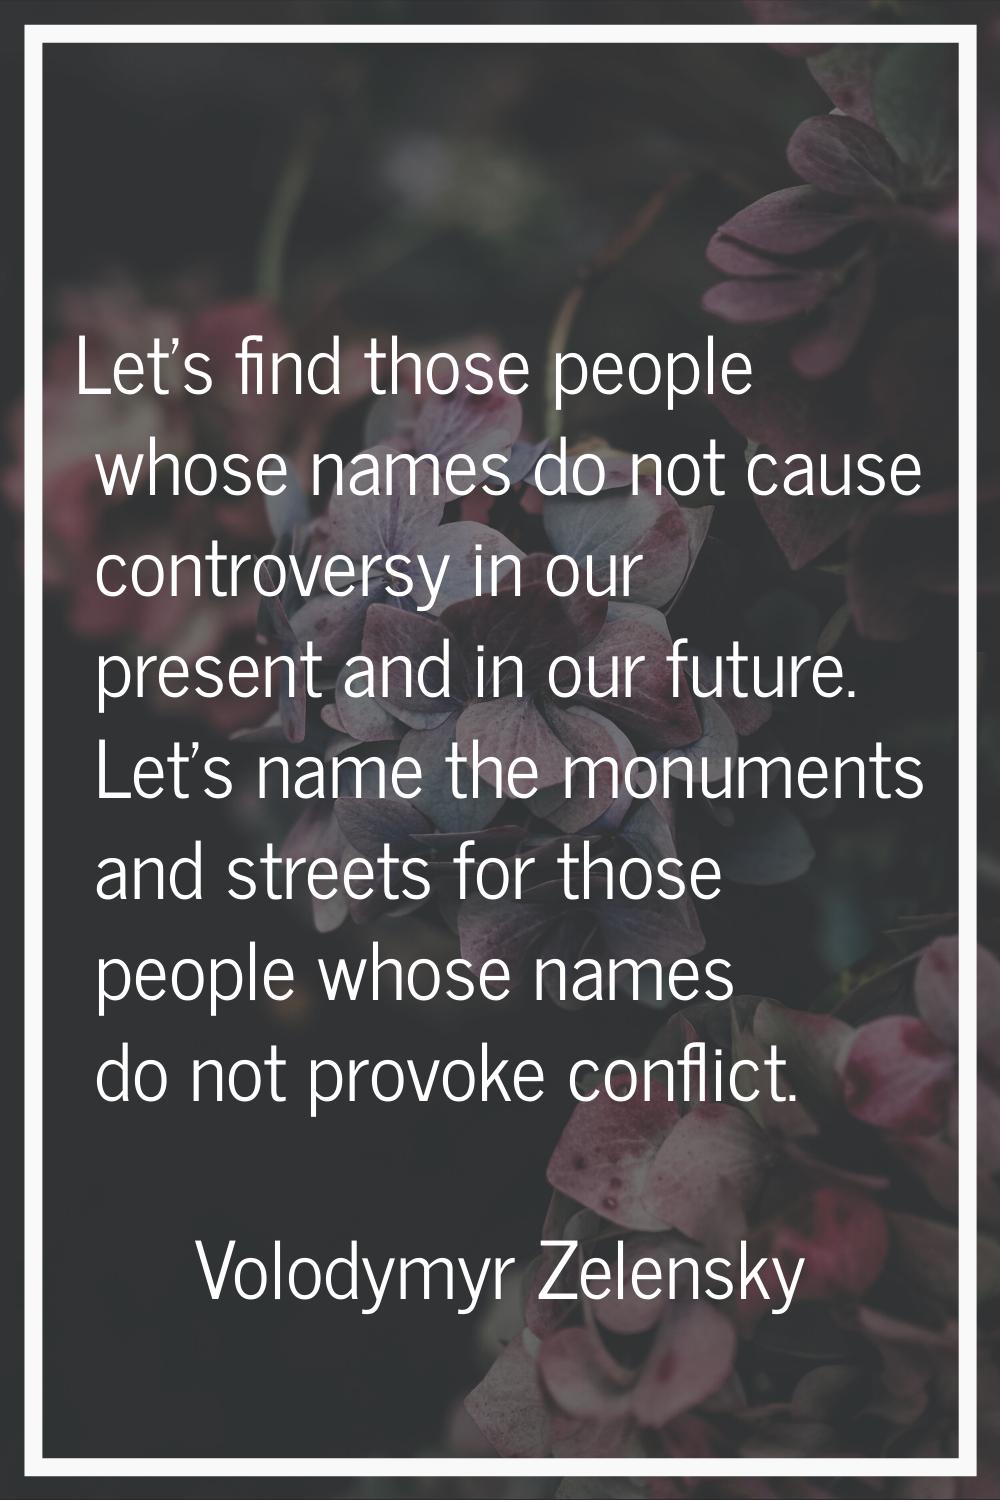 Let's find those people whose names do not cause controversy in our present and in our future. Let'